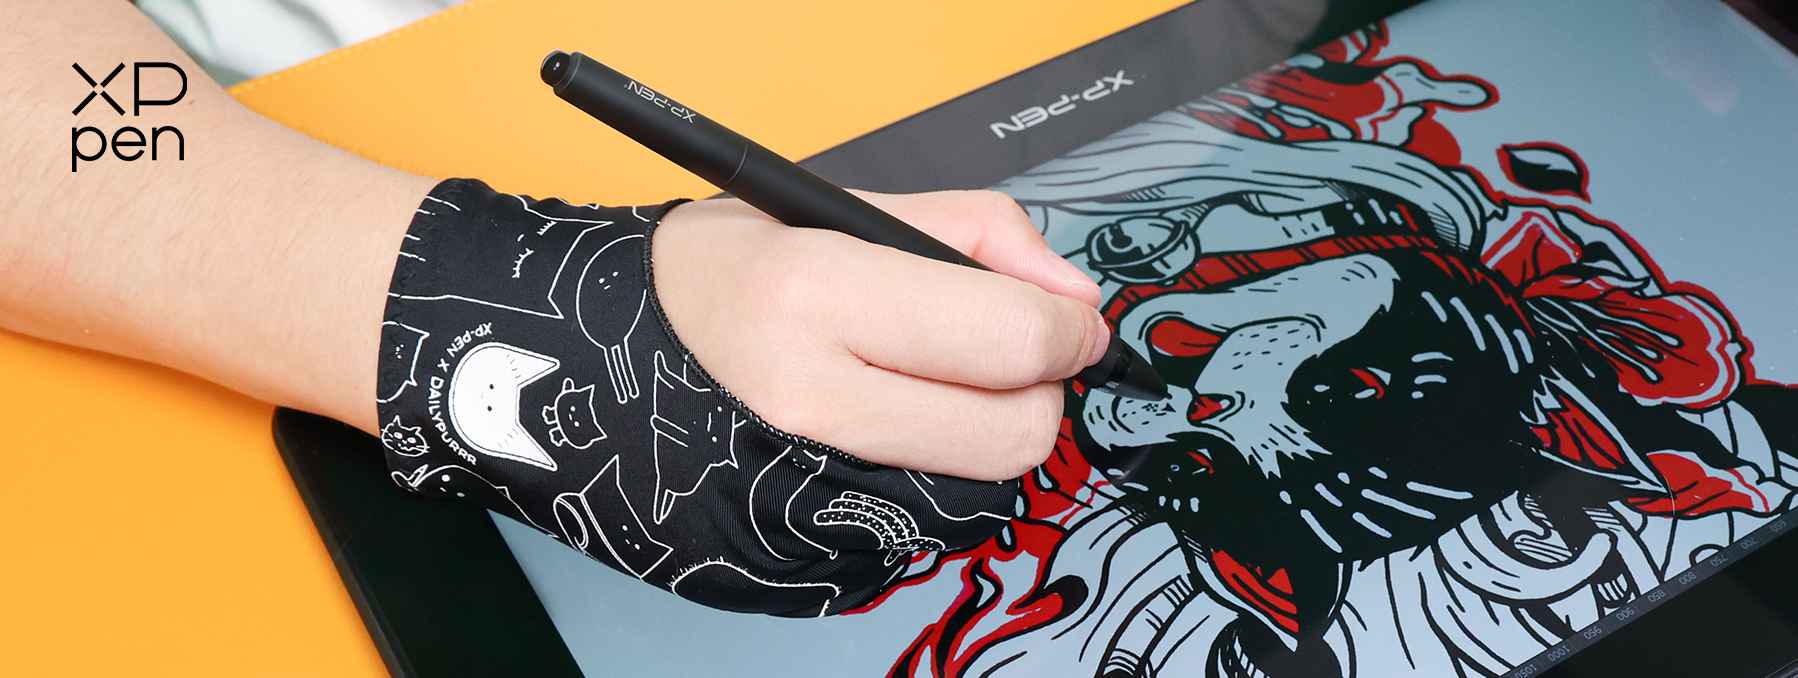 XPPen magic drawing pad review by an artist_drawing demo 